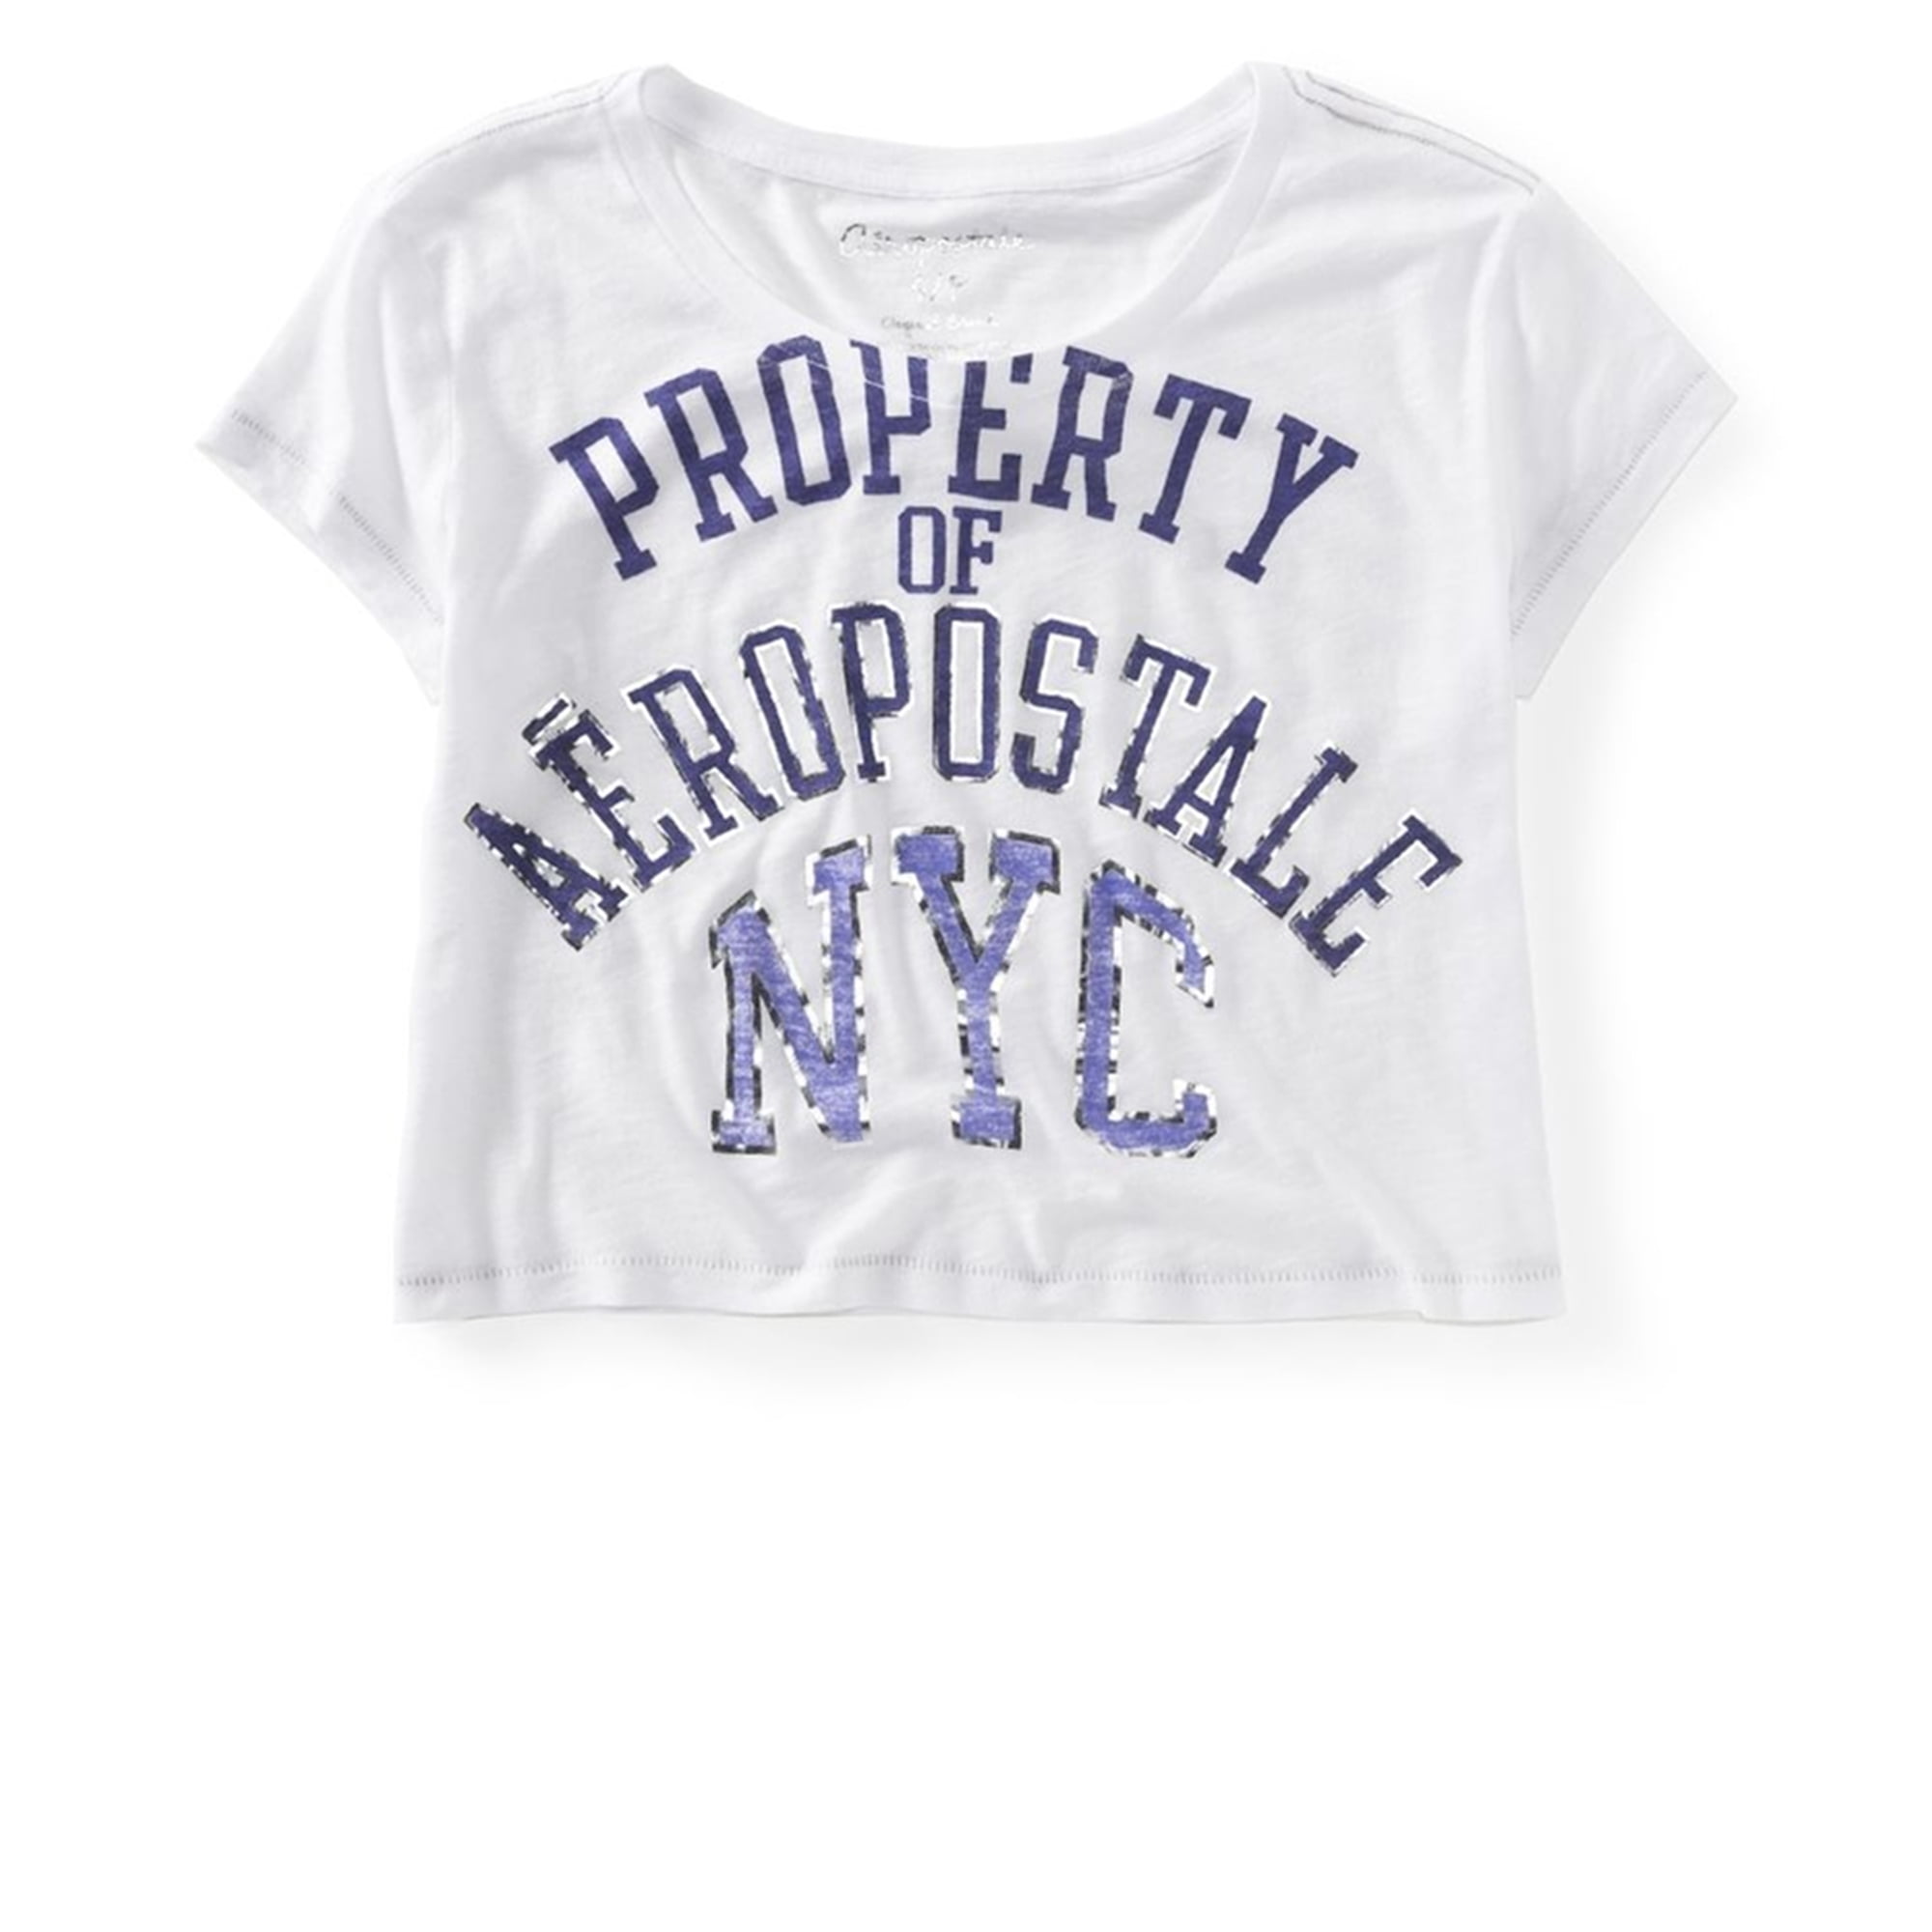 AEROPOSTALE Womens Property of Graphic T-Shirt 